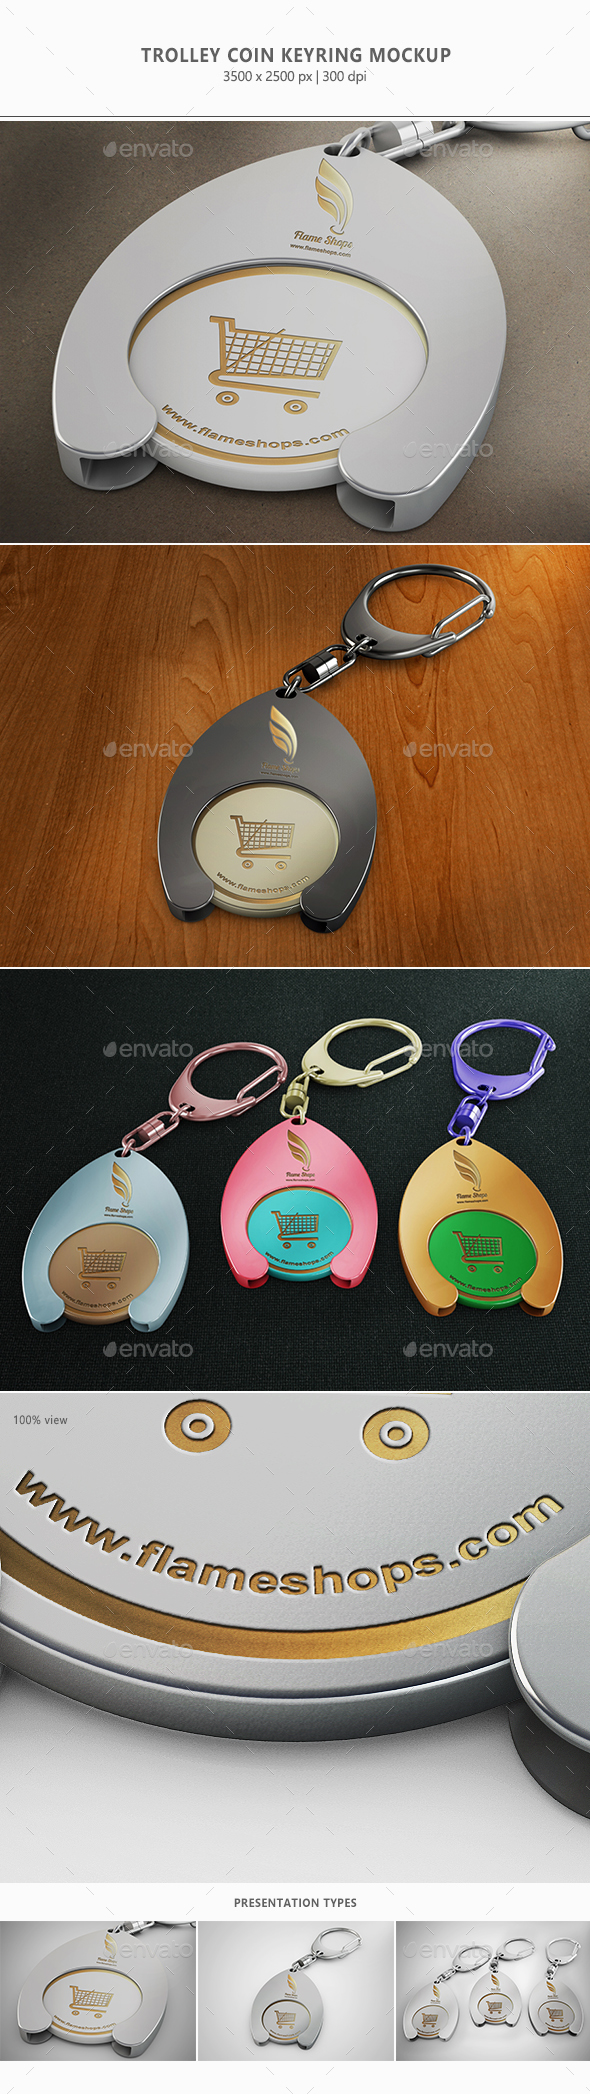 Download Trolley Coin Keyring Mock Up By Sealord Graphicriver